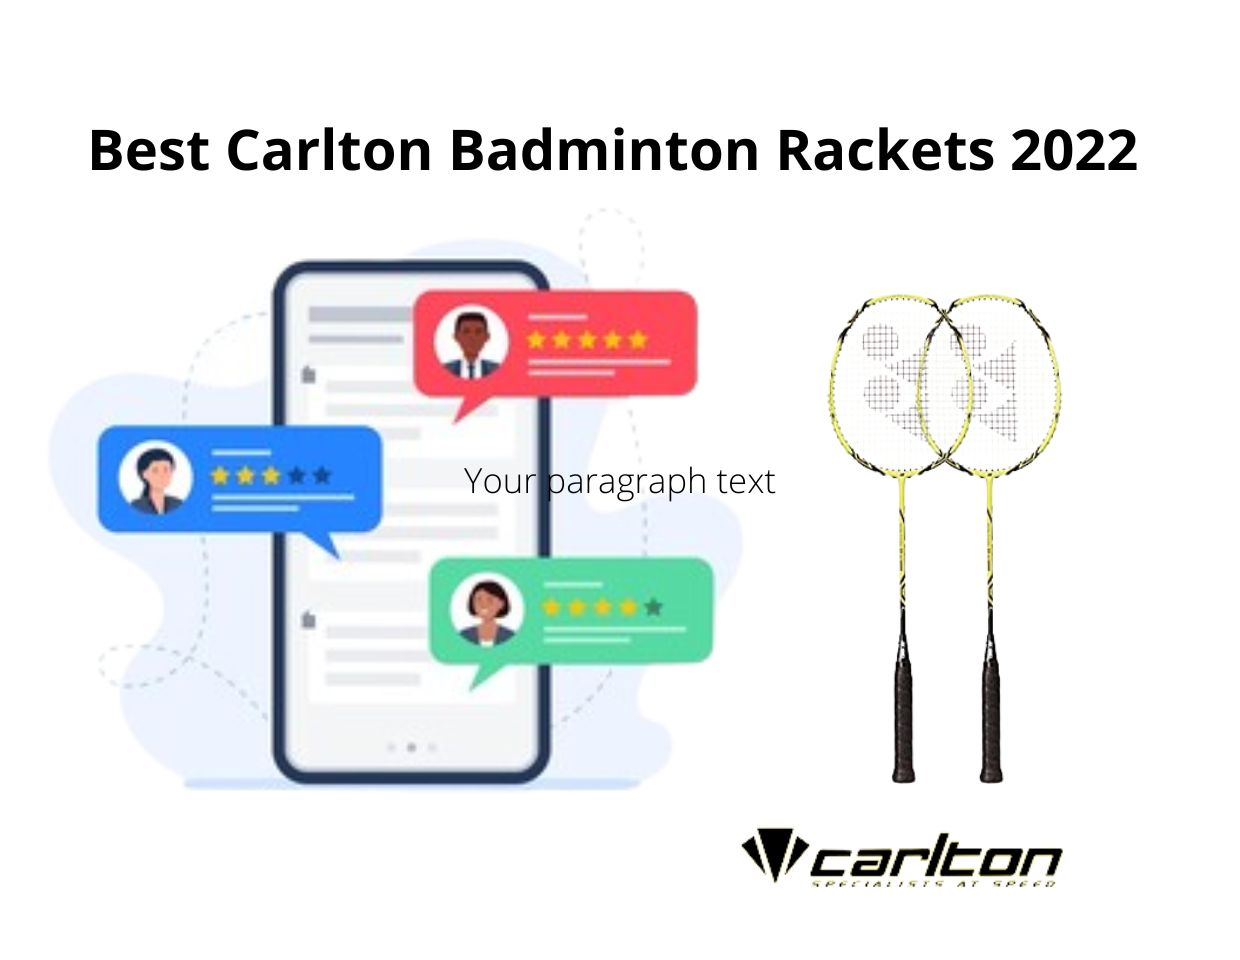 5 Best Carlton Badminton Rackets 2022 [Reviews and Buyer's Guide]